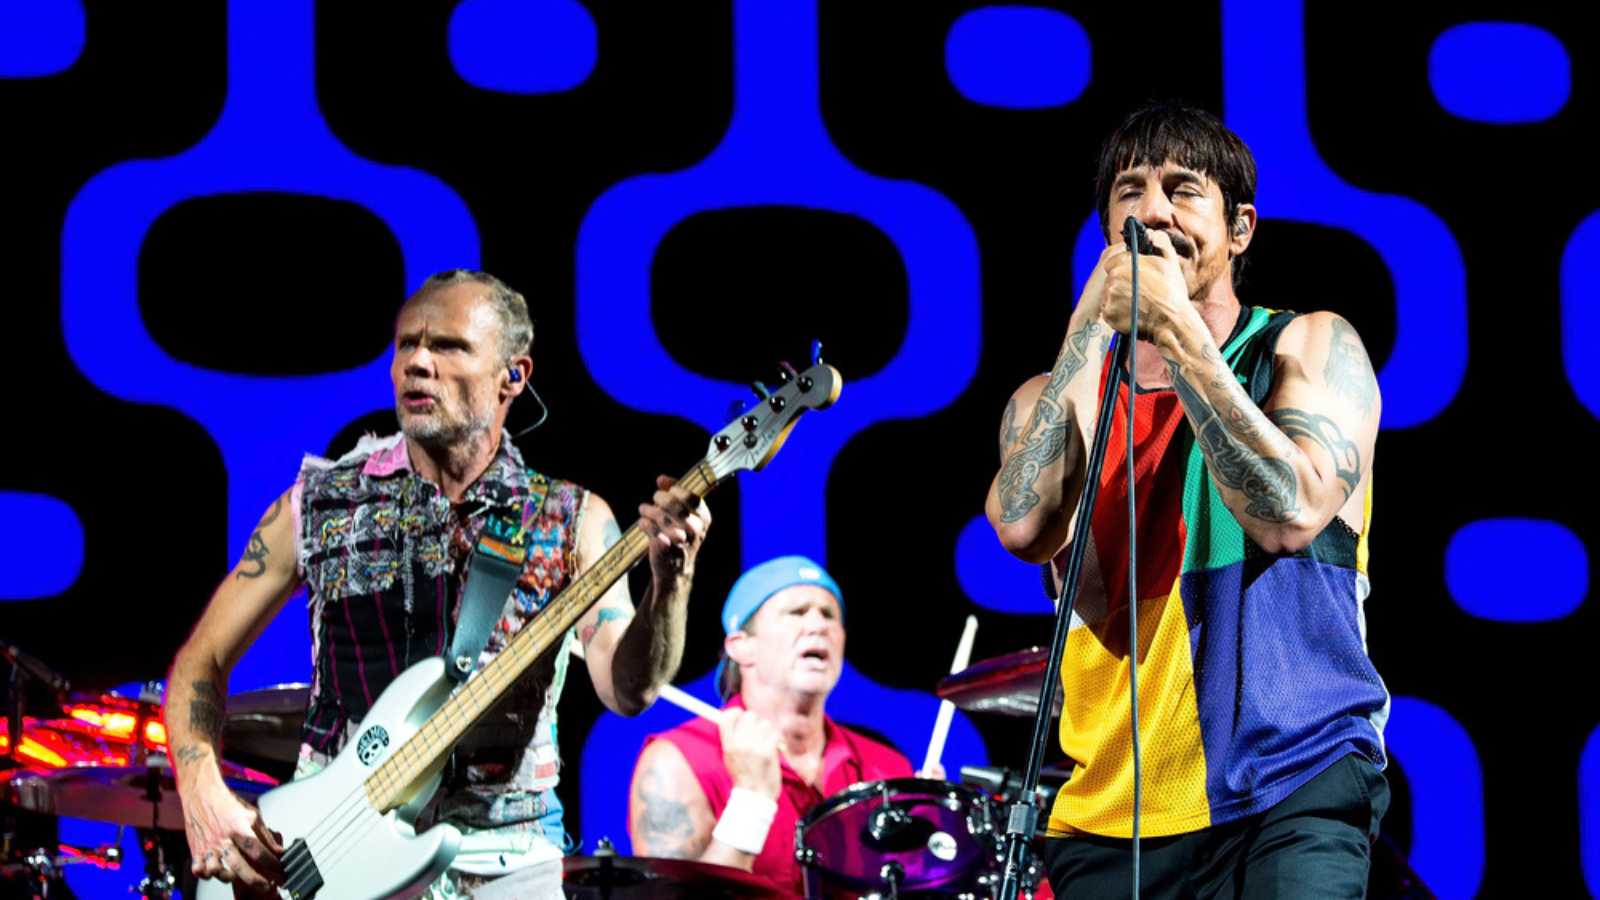 BENICASSIM, SPAIN - JUL 15: Red Hot Chili Peppers (music band) performs in concert at FIB Festival on July 15, 2017 in Benicassim, Spain.